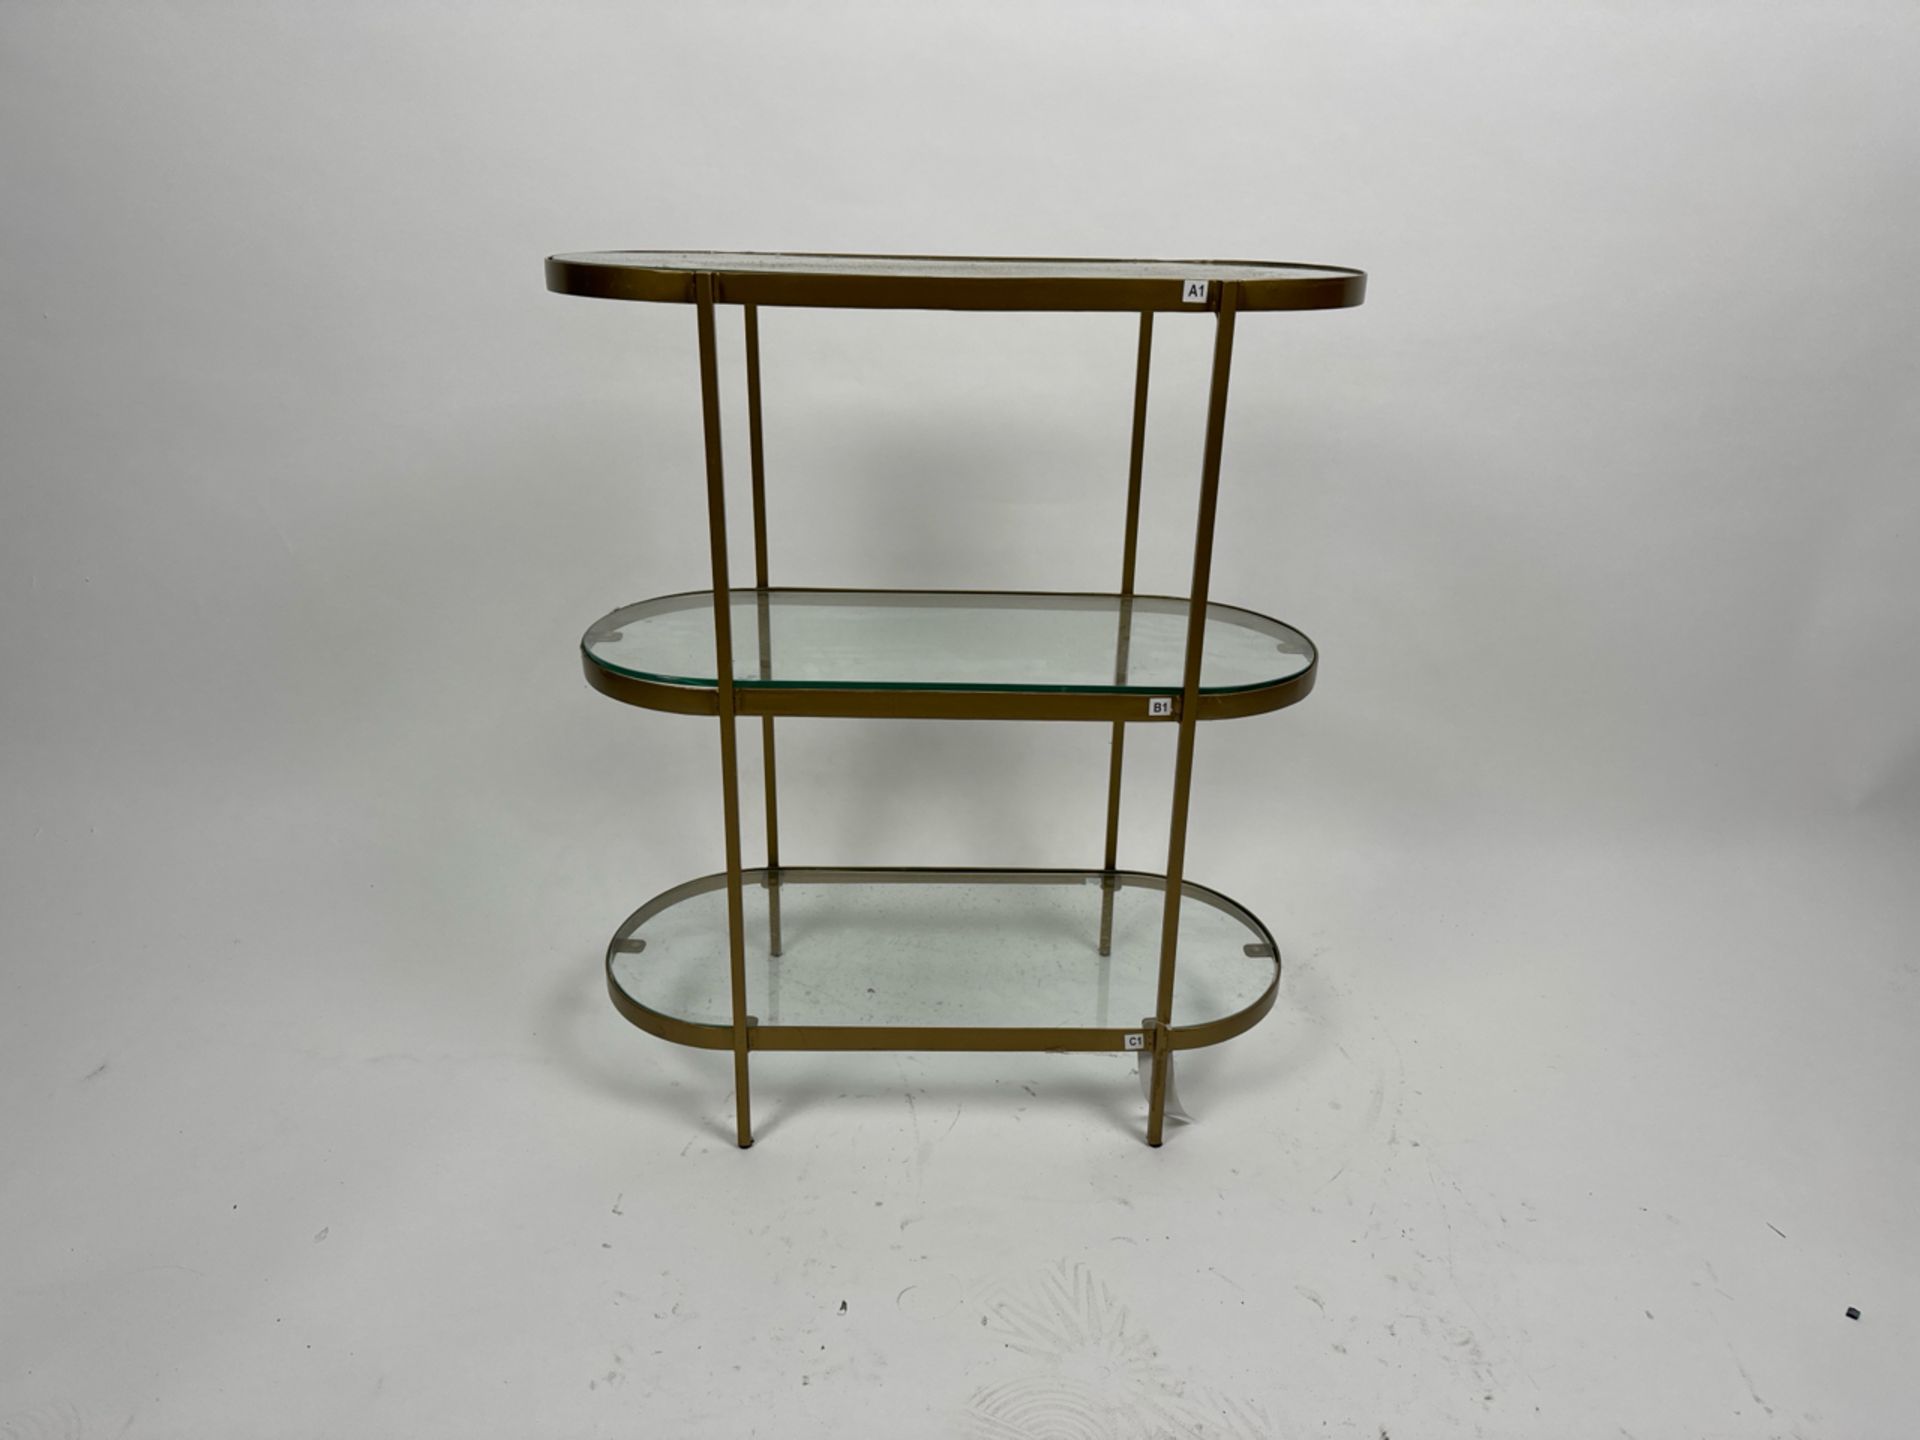 AMARA Glass 3 Tiered Side Table - Image 2 of 3